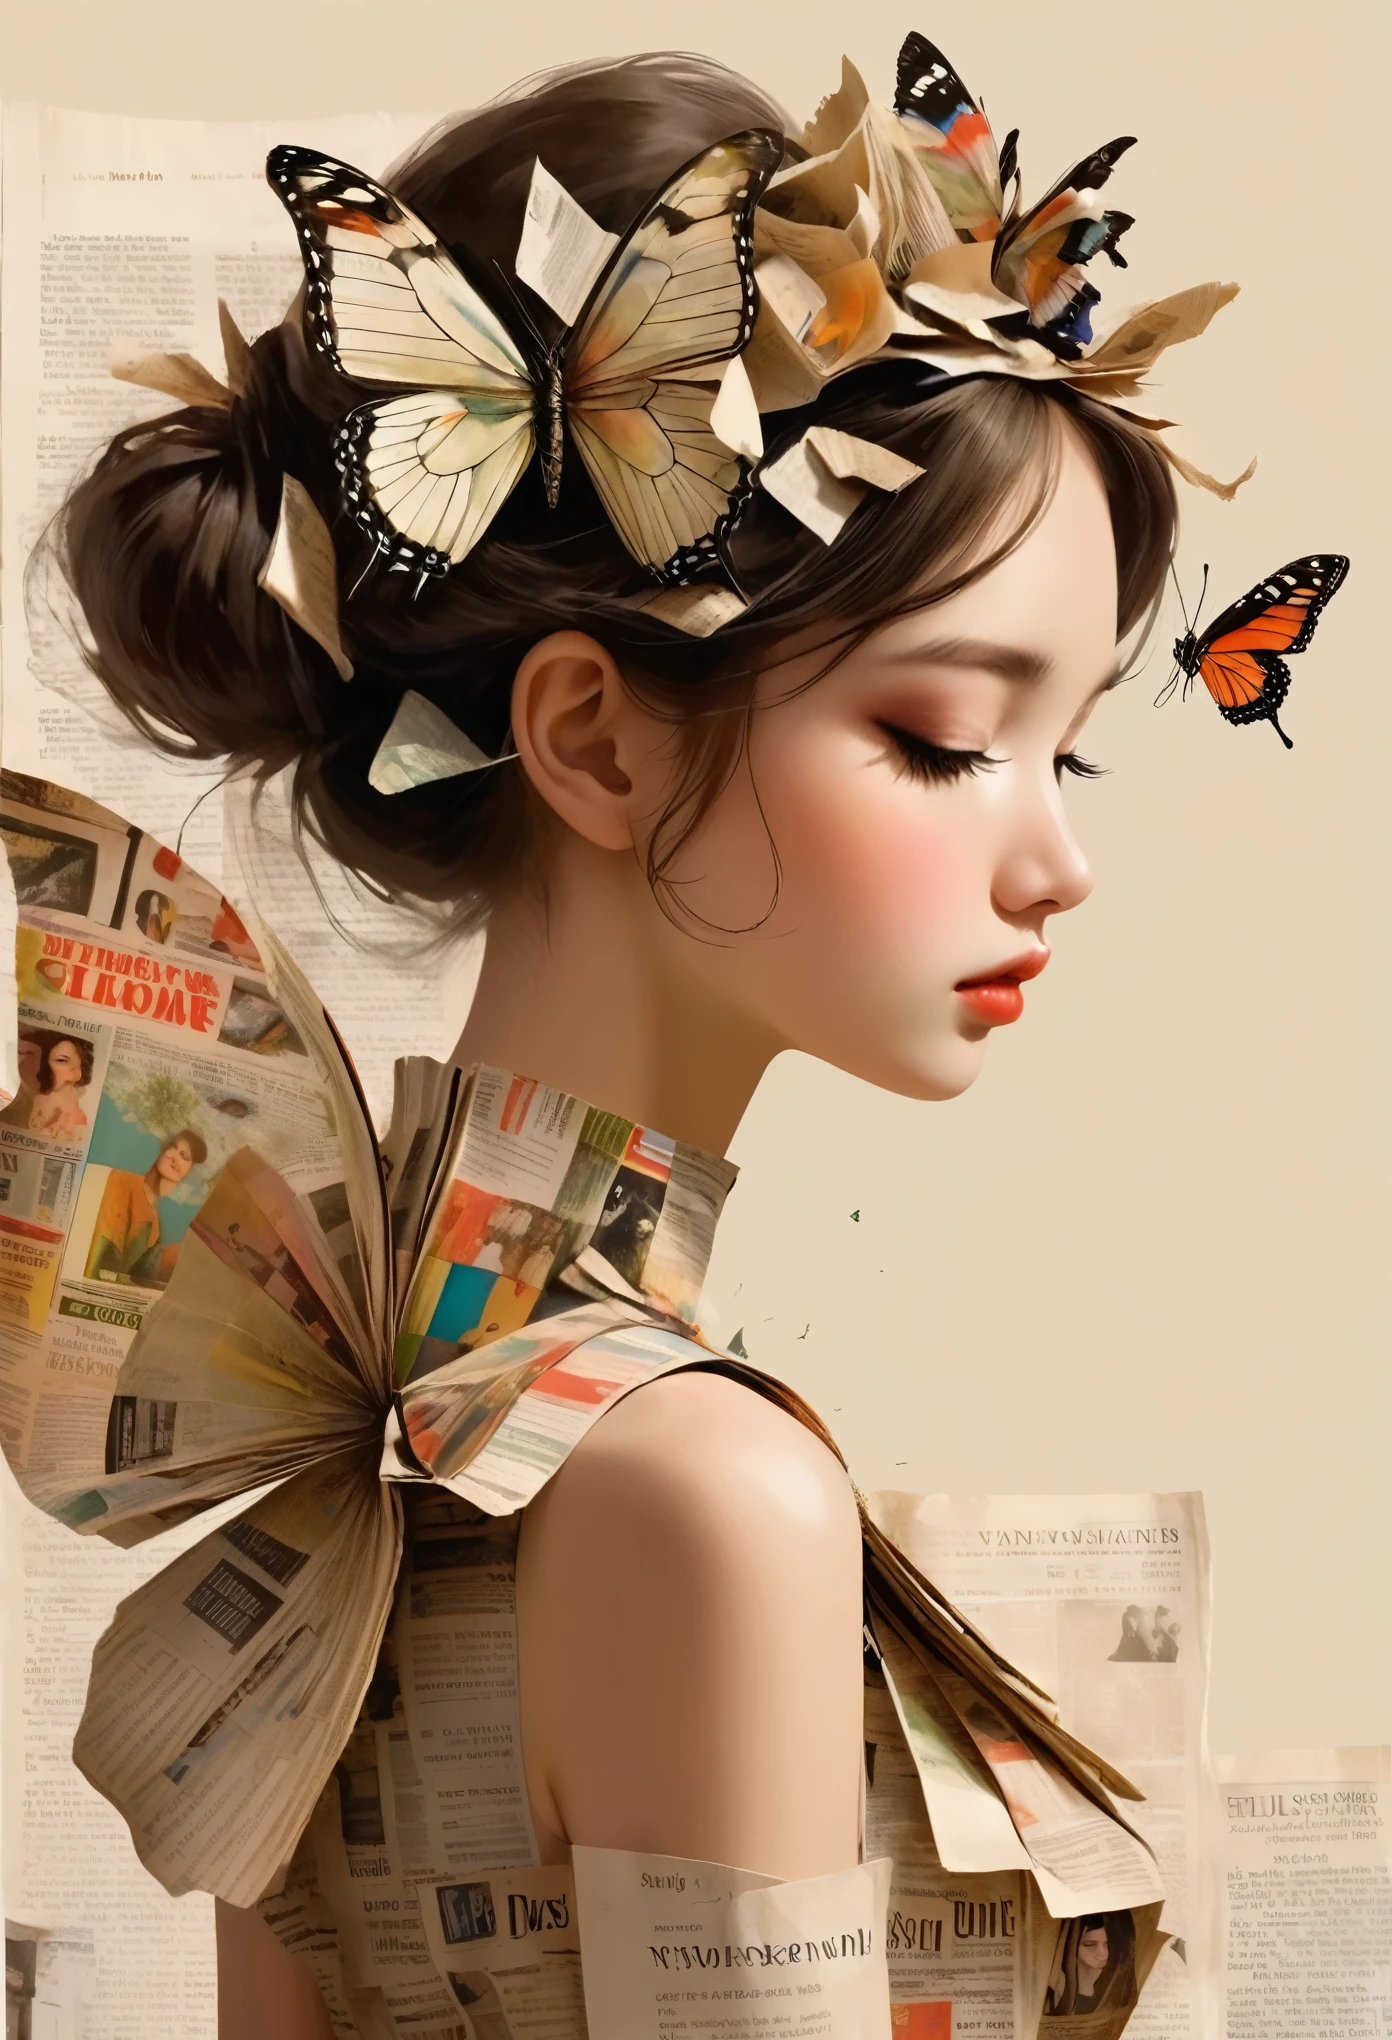 Side view girl, Solitary, Wearing a magazine cover dress, Delicate facial features and long eyelashes, A butterfly landed on her head, There were newspaper clippings all around.. Girl&#39;s face with realistic details, Bright colors，Clear focus. The overall image is a high-resolution masterpiece, Suitable for magazine cover. The art style is a mix of photography and concept art. Bright and eye-catching colors. The lighting is studio style, Soft lighting. Tips also include text and barcodes commonly found on magazine covers.